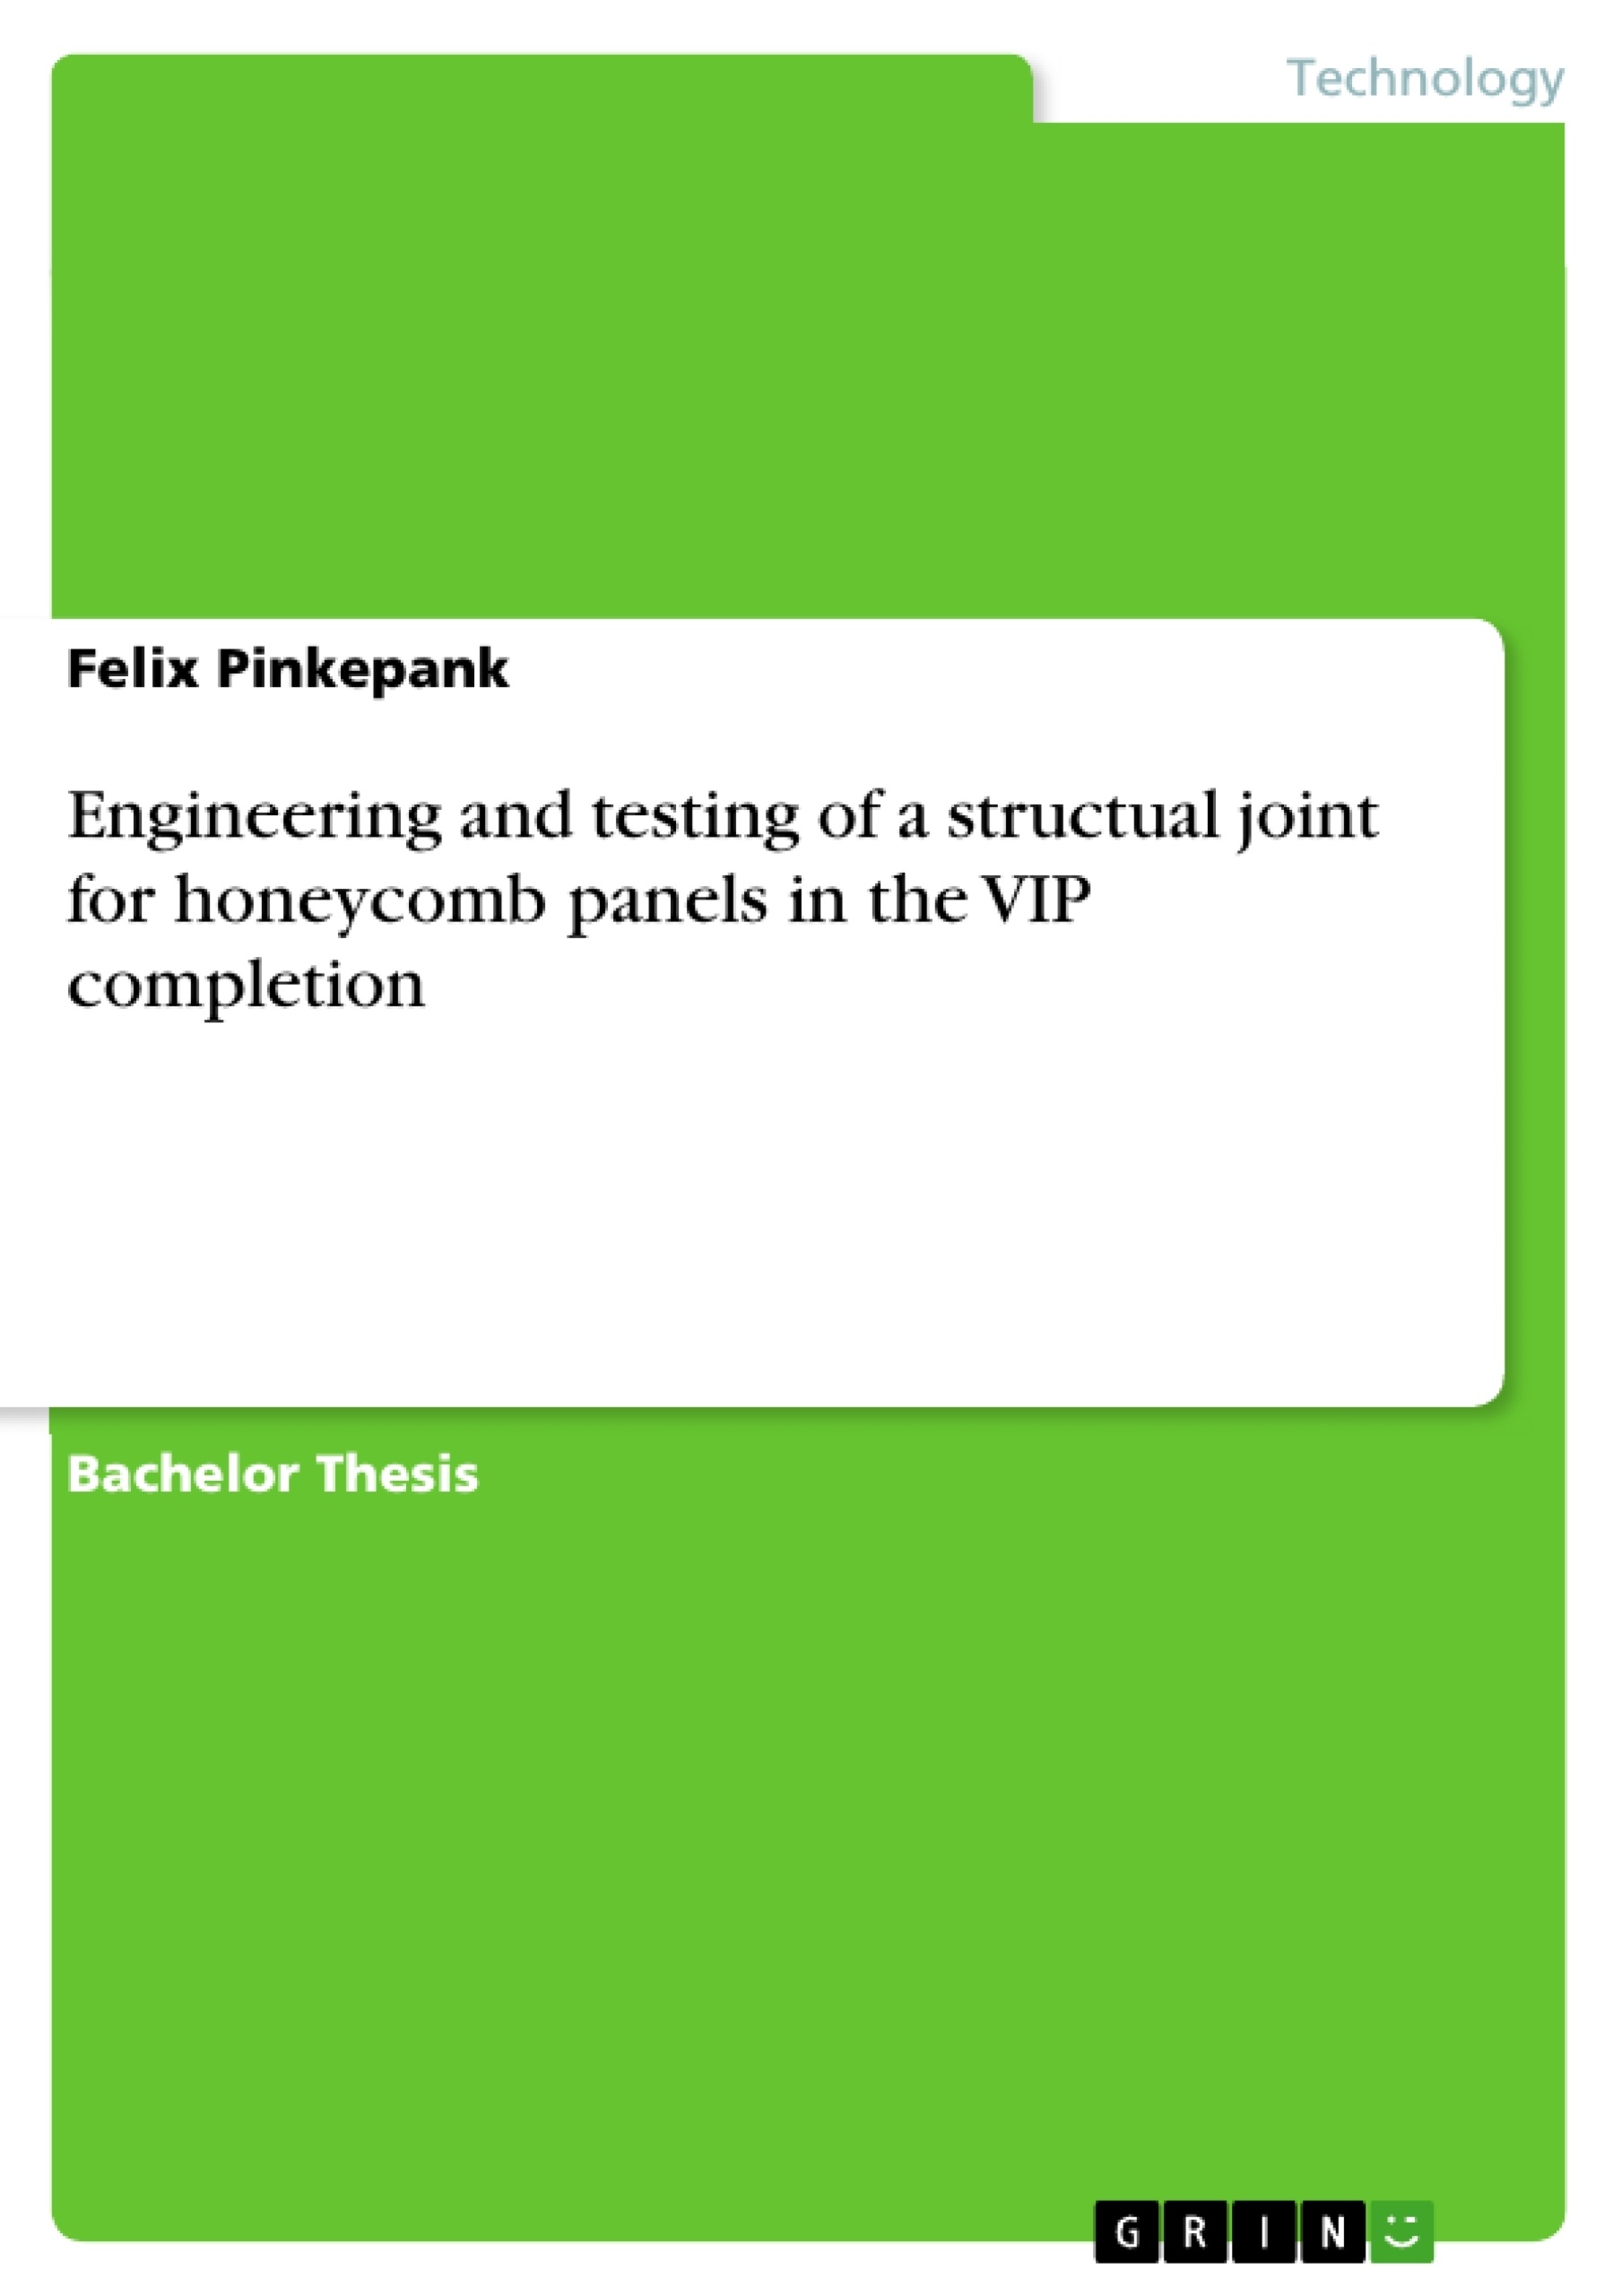 Titel: Engineering and testing of a structual joint for honeycomb panels in the VIP completion